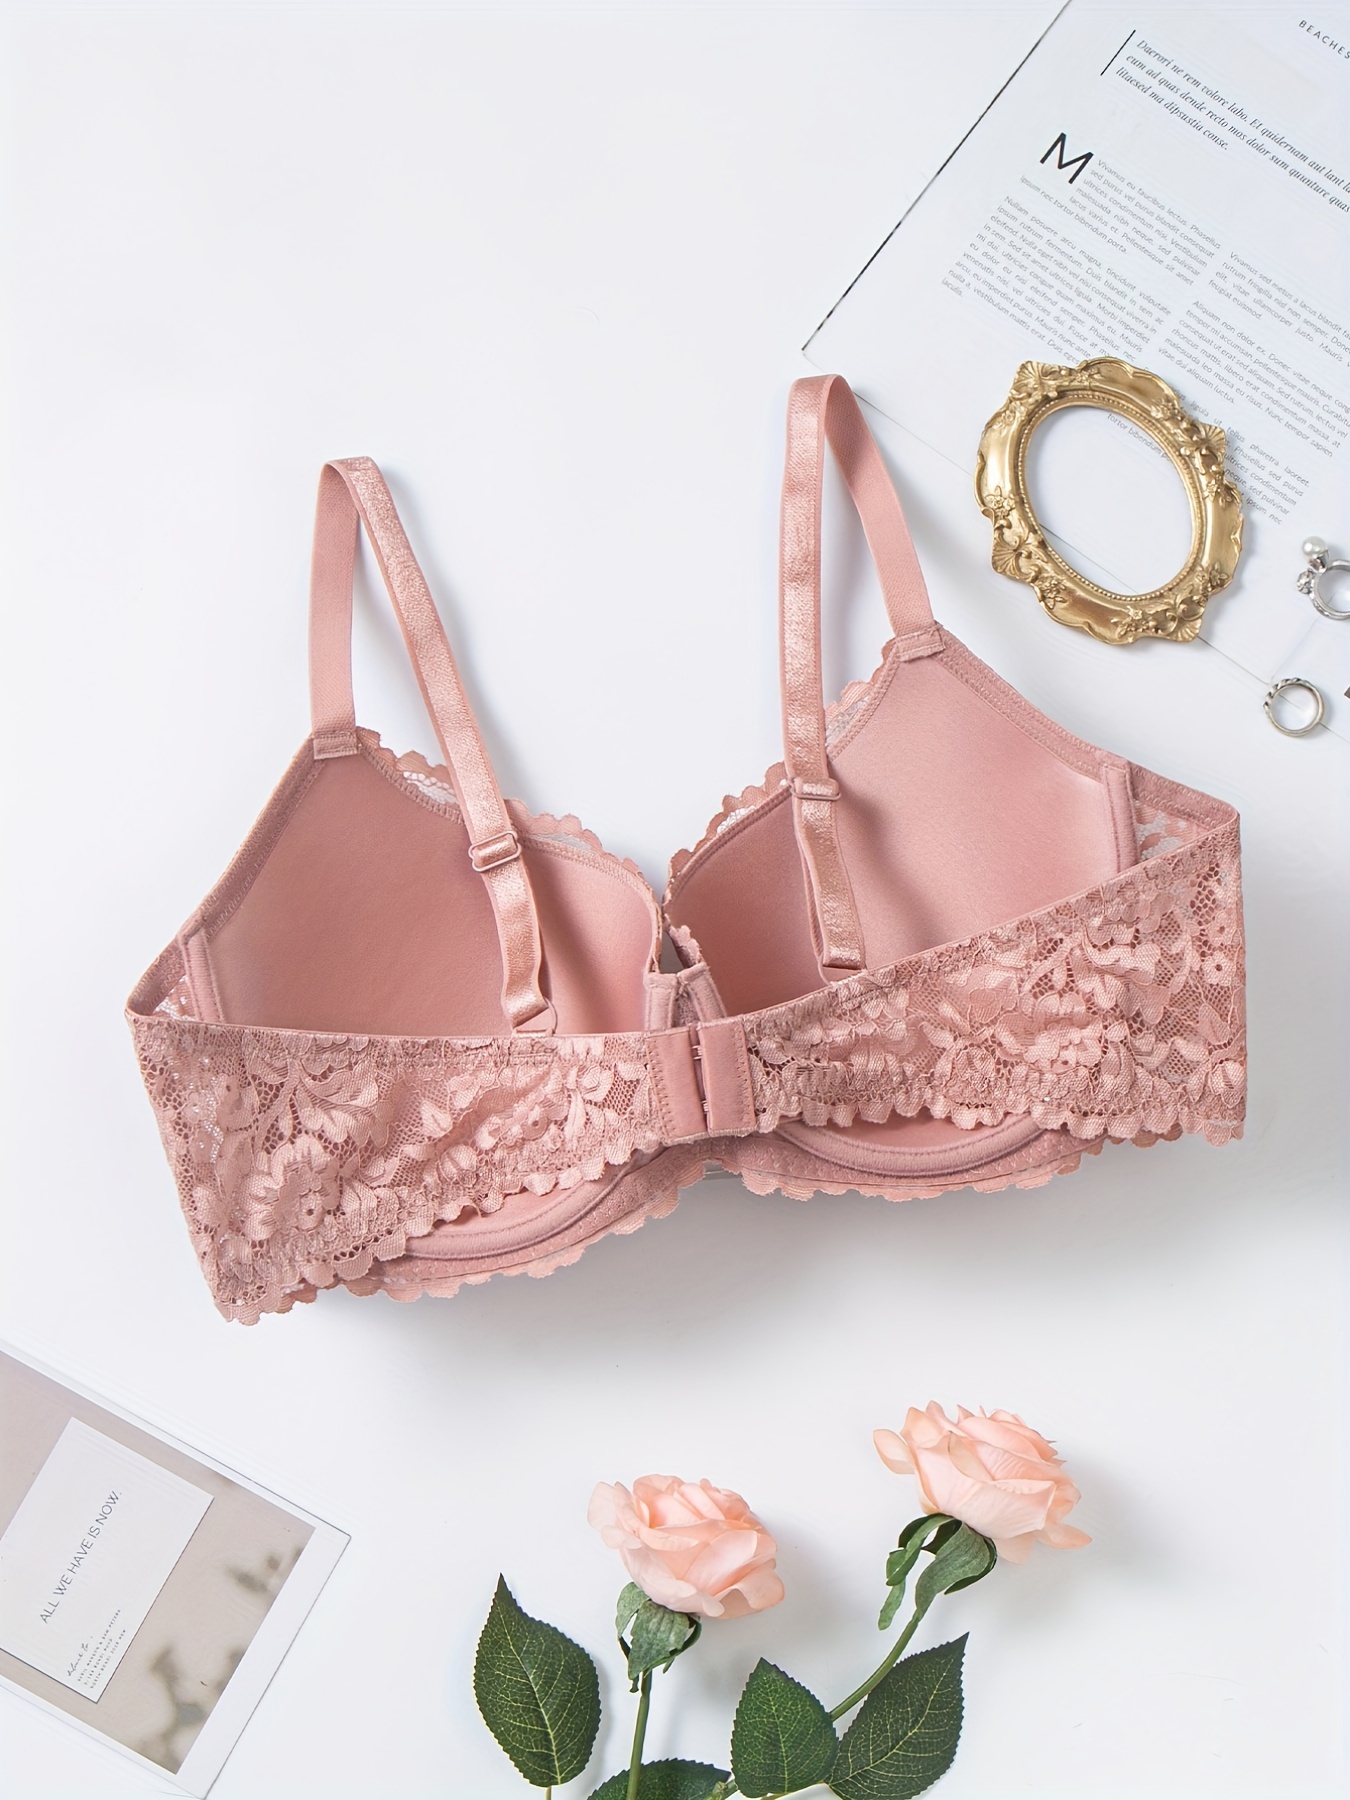 Forma Padded Wired 3/4Th Cup Lace Bra-Pink